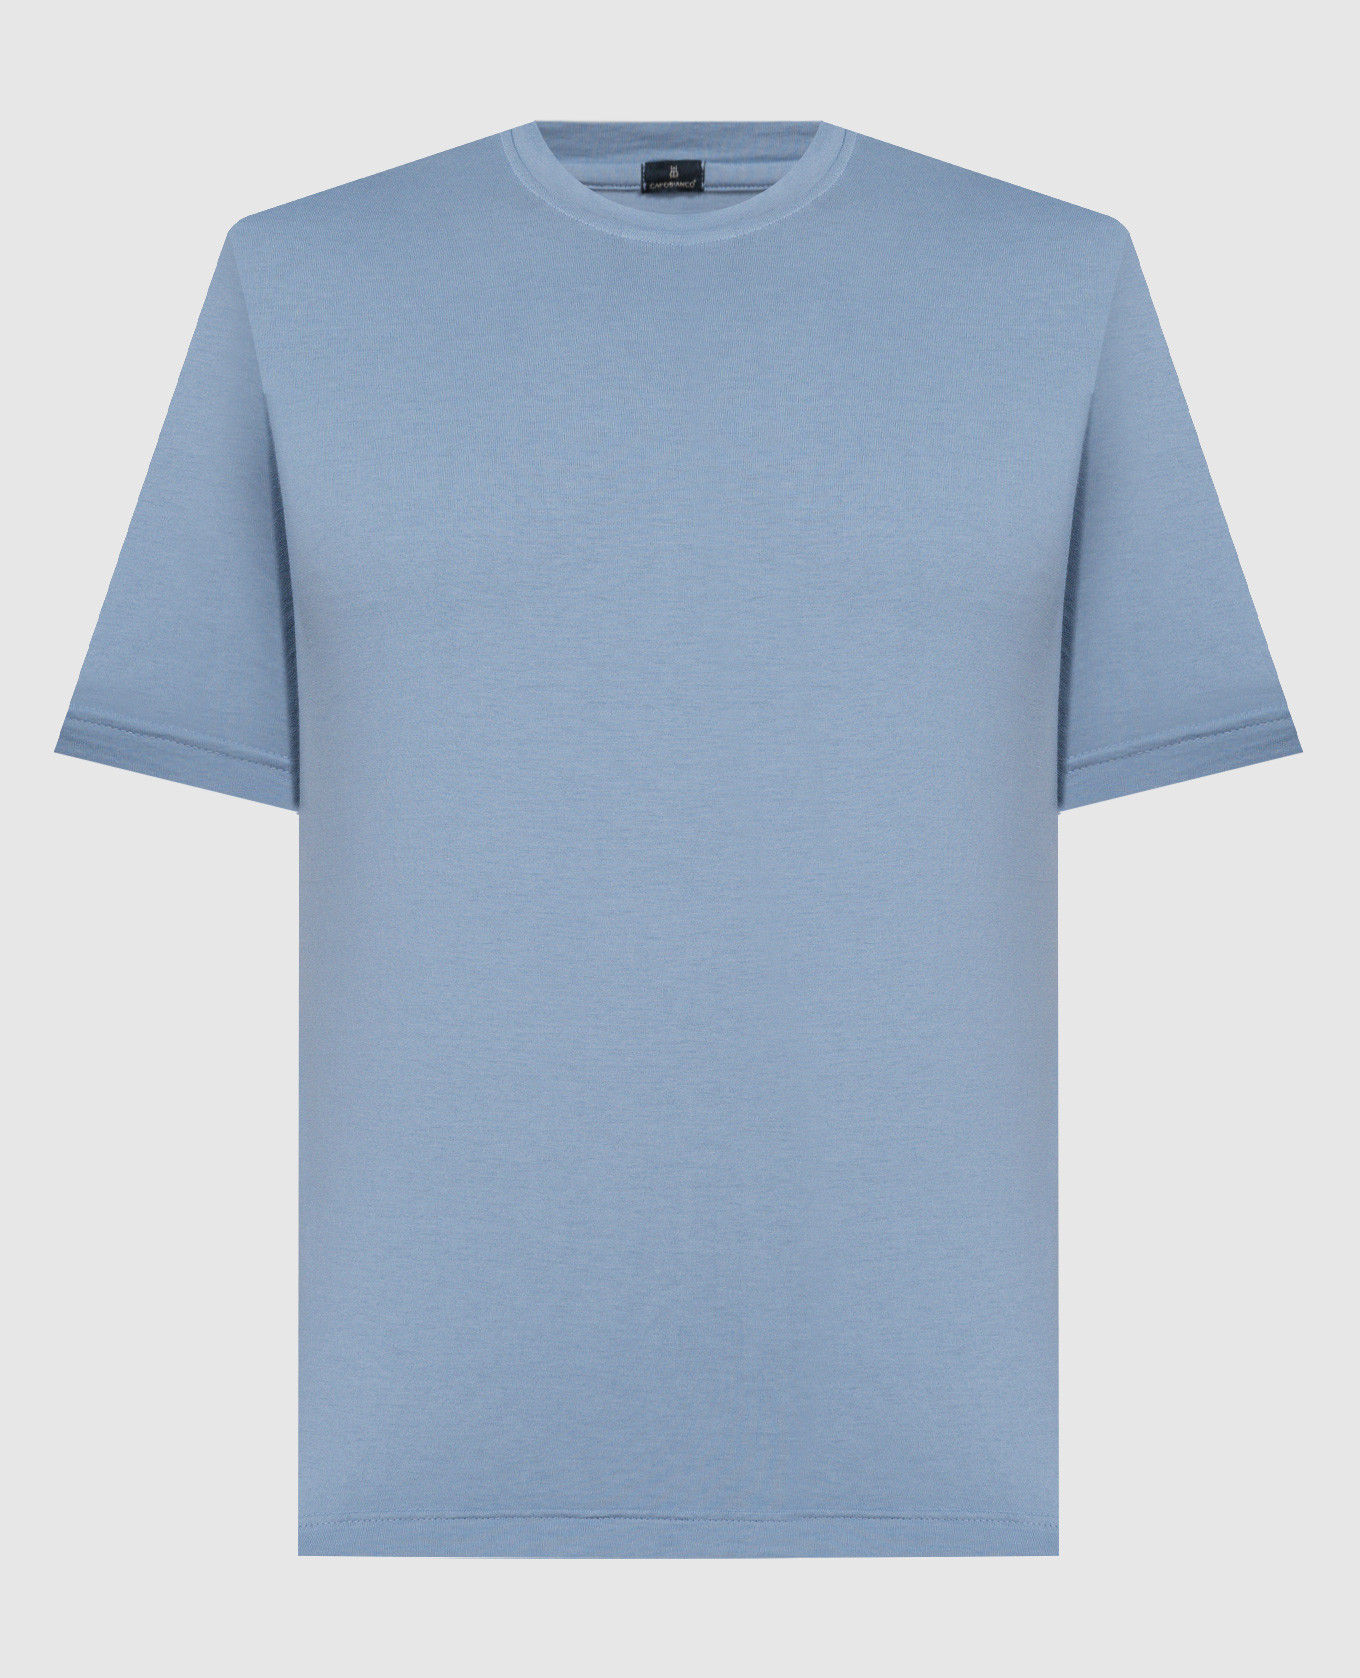 Blue t-shirt with logo patch